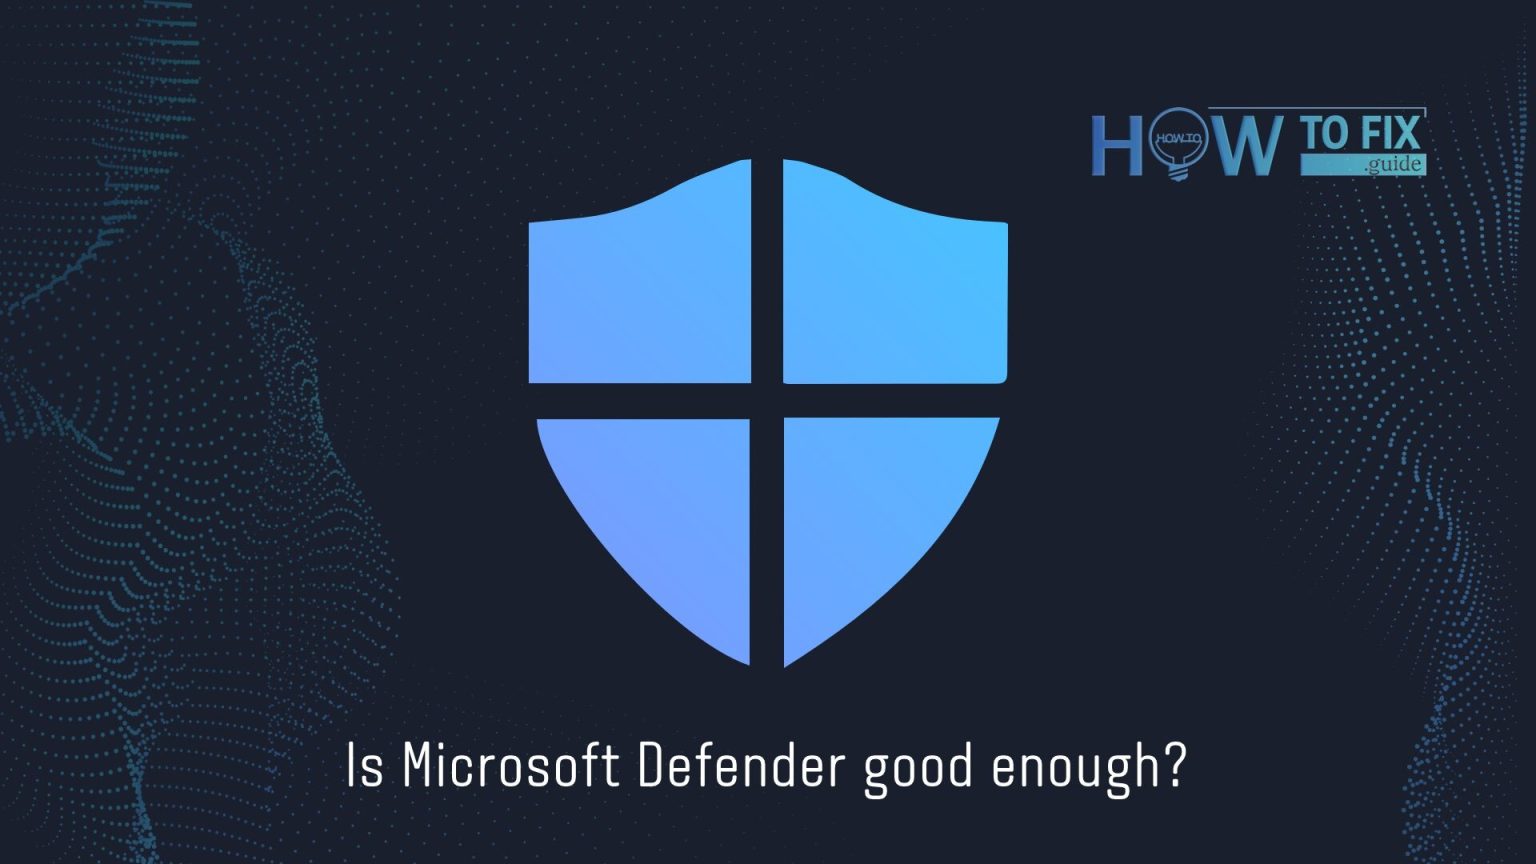 Is Microsoft Defender good enough? — How To Fix Guide